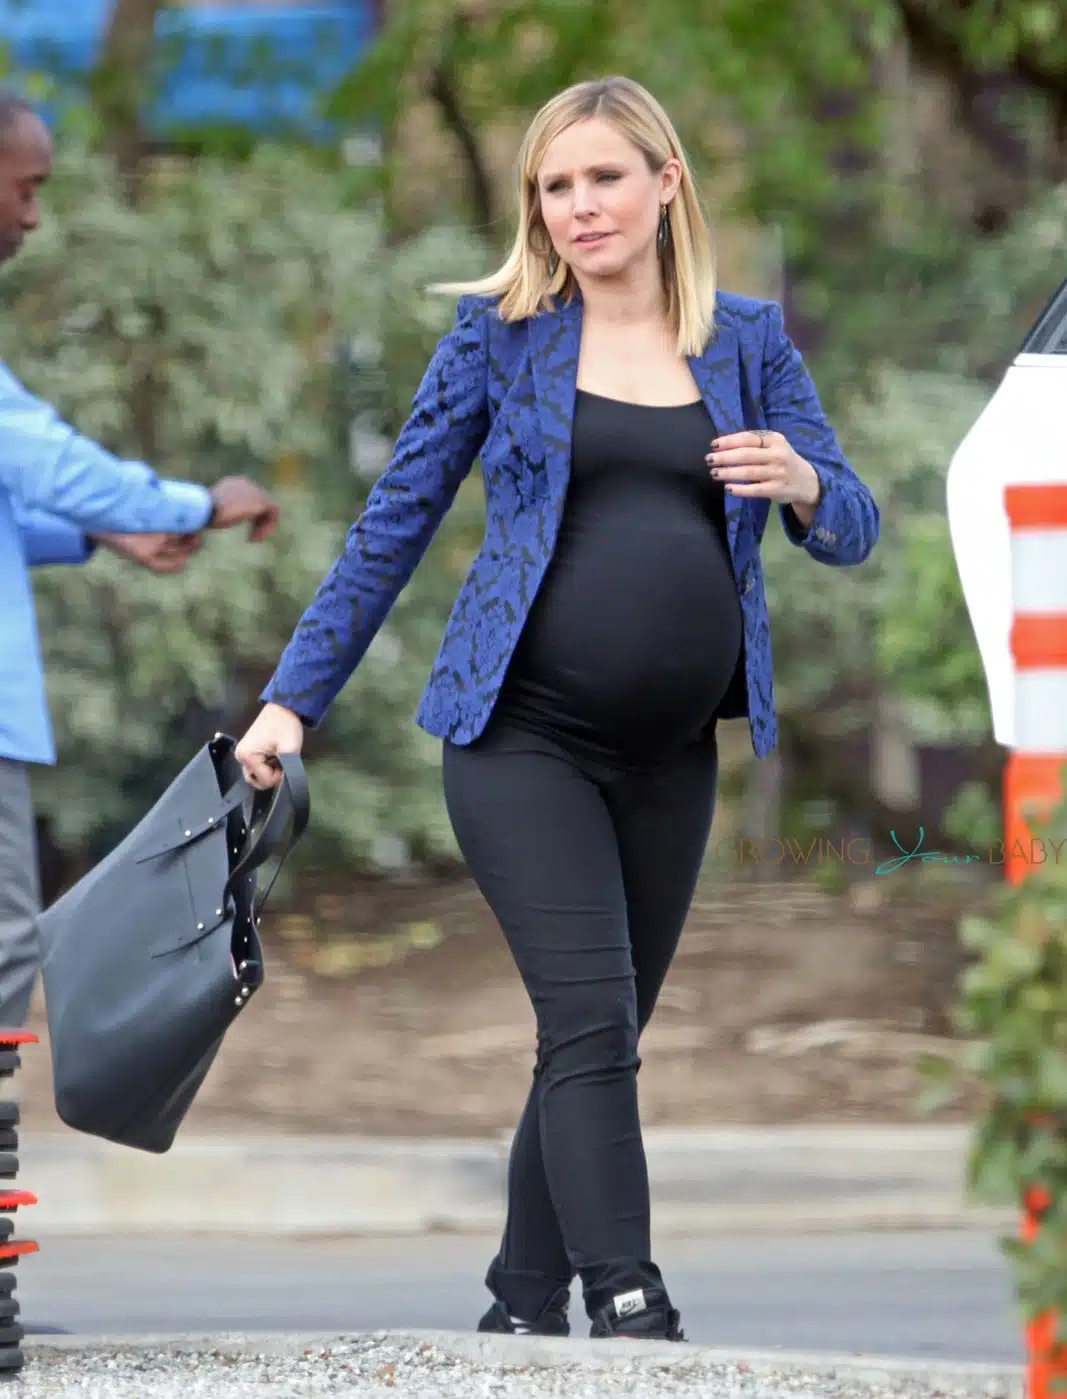 Heavily pregnant Kristen Bell seen on the set of 'House of Lies' in Los Angeles